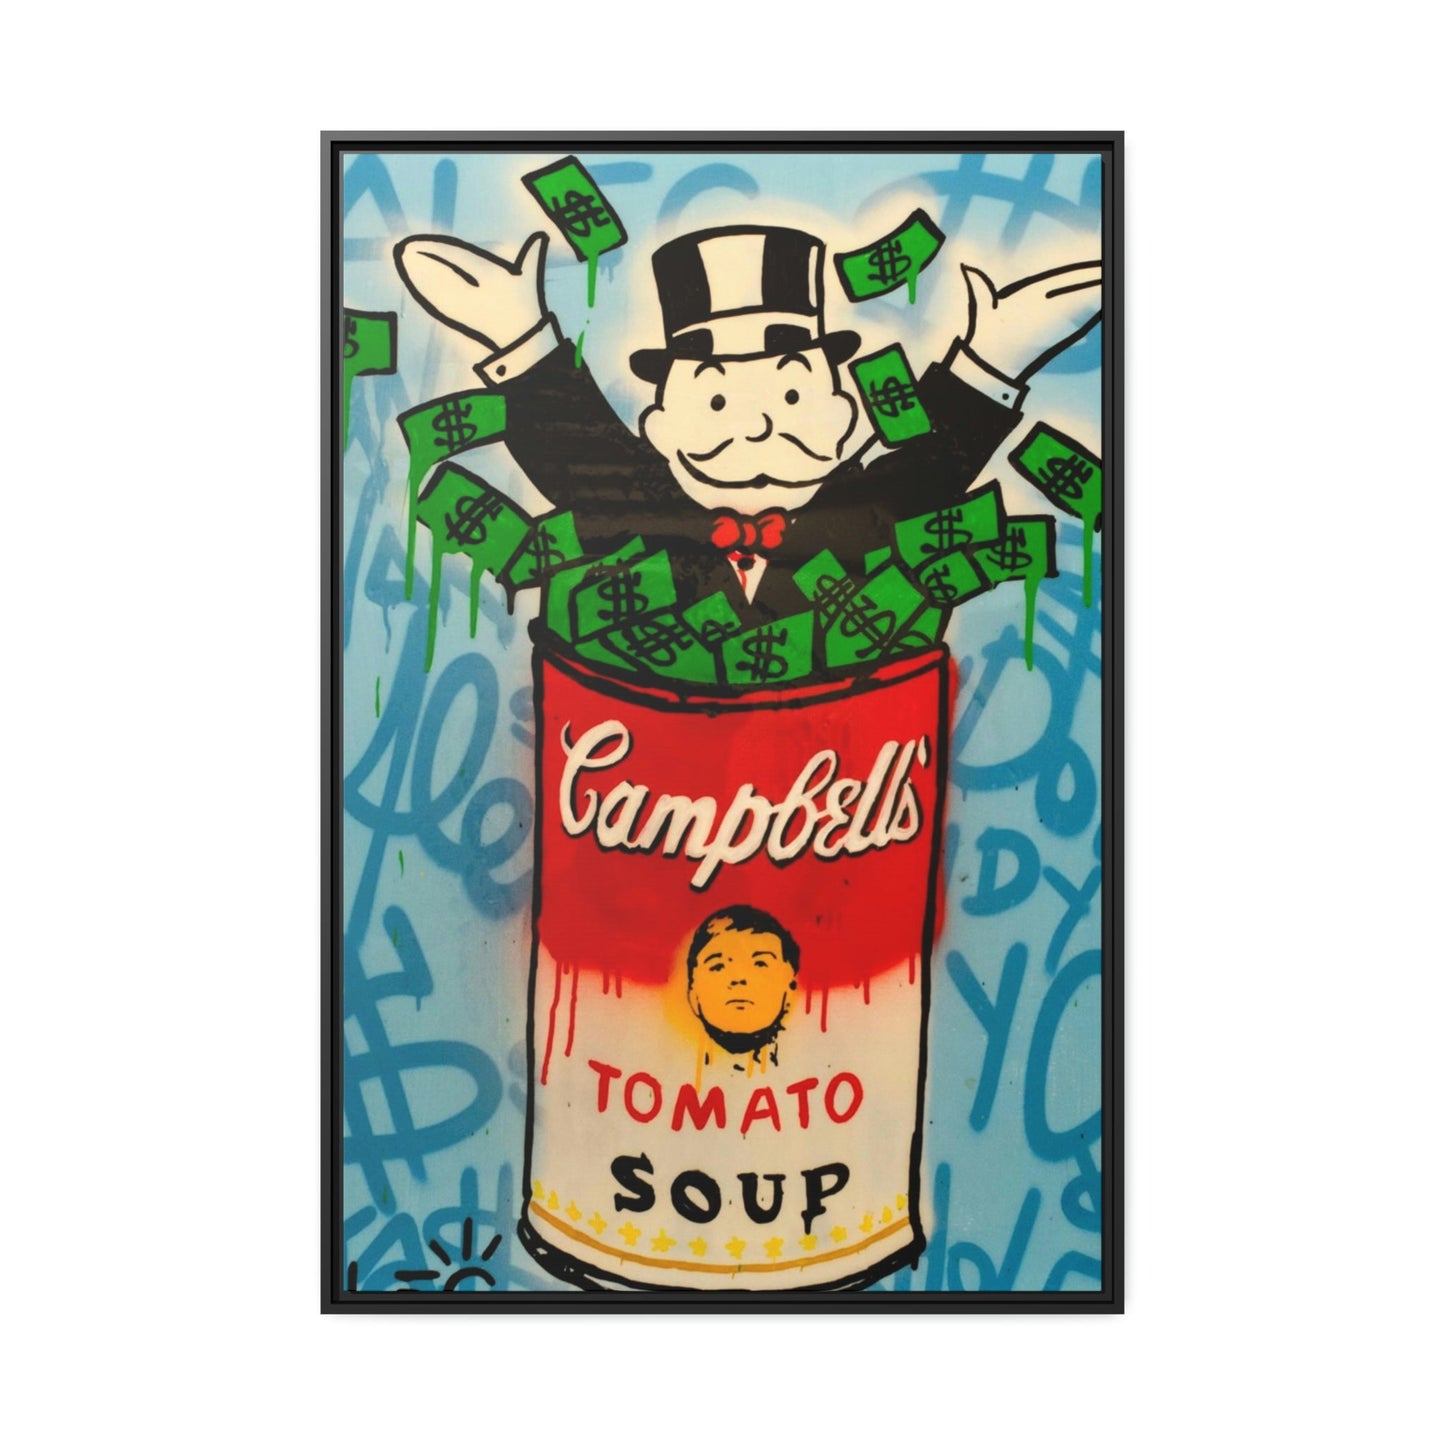 Money Talks in Alec Monopoly's Canvas Painting: Wall Art and Poster for Finance Enthusiasts